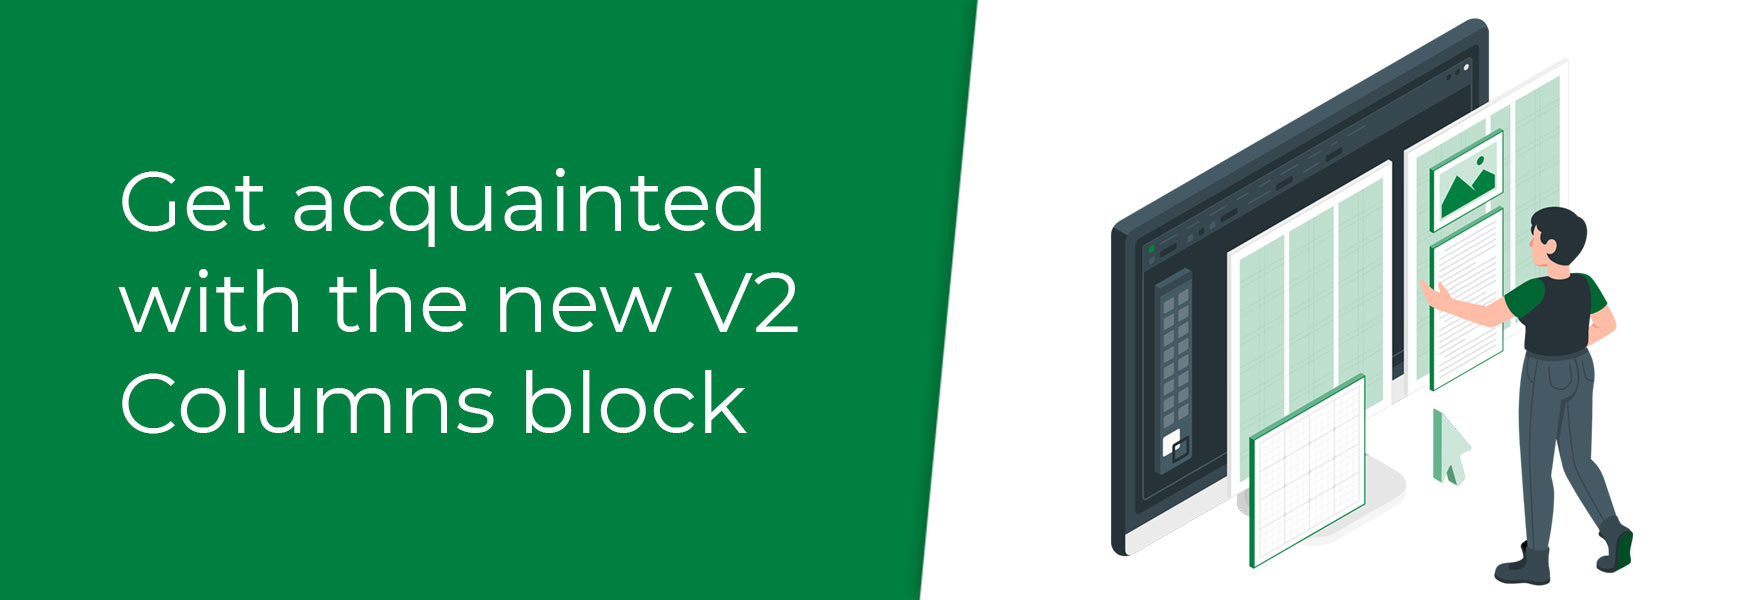 Get acquainted with the new V2 Columns block